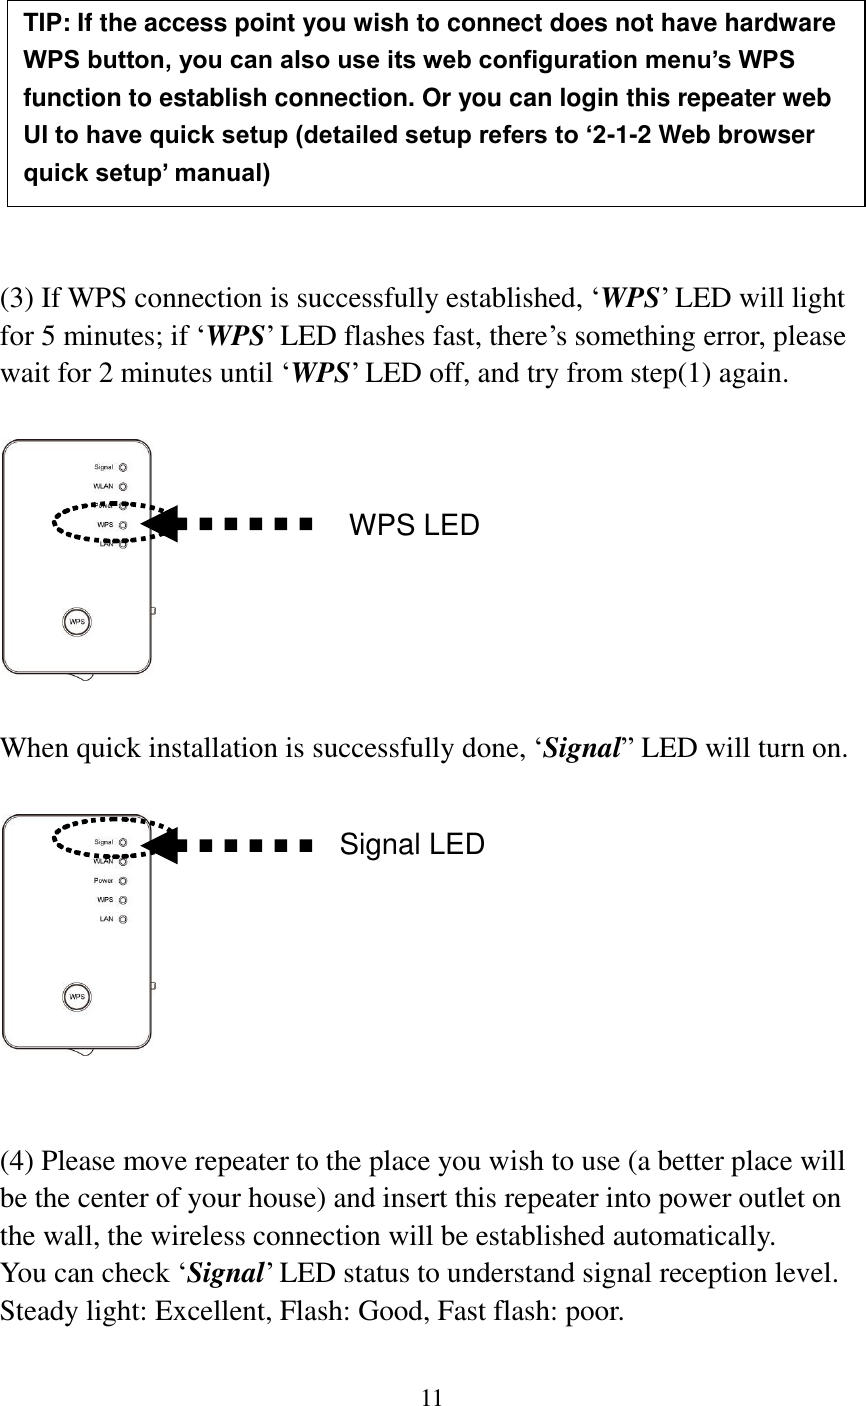 11           (3) If WPS connection is successfully established, „WPS‟ LED will light for 5 minutes; if „WPS‟ LED flashes fast, there‟s something error, please wait for 2 minutes until „WPS‟ LED off, and try from step(1) again.      When quick installation is successfully done, „Signal” LED will turn on.     (4) Please move repeater to the place you wish to use (a better place will be the center of your house) and insert this repeater into power outlet on the wall, the wireless connection will be established automatically.   You can check „Signal‟ LED status to understand signal reception level.   Steady light: Excellent, Flash: Good, Fast flash: poor.  TIP: If the access point you wish to connect does not have hardware WPS button, you can also use its web configuration menu’s WPS function to establish connection. Or you can login this repeater web UI to have quick setup (detailed setup refers to ‘2-1-2 Web browser quick setup’ manual)   manual)  WPS LED Signal LED 